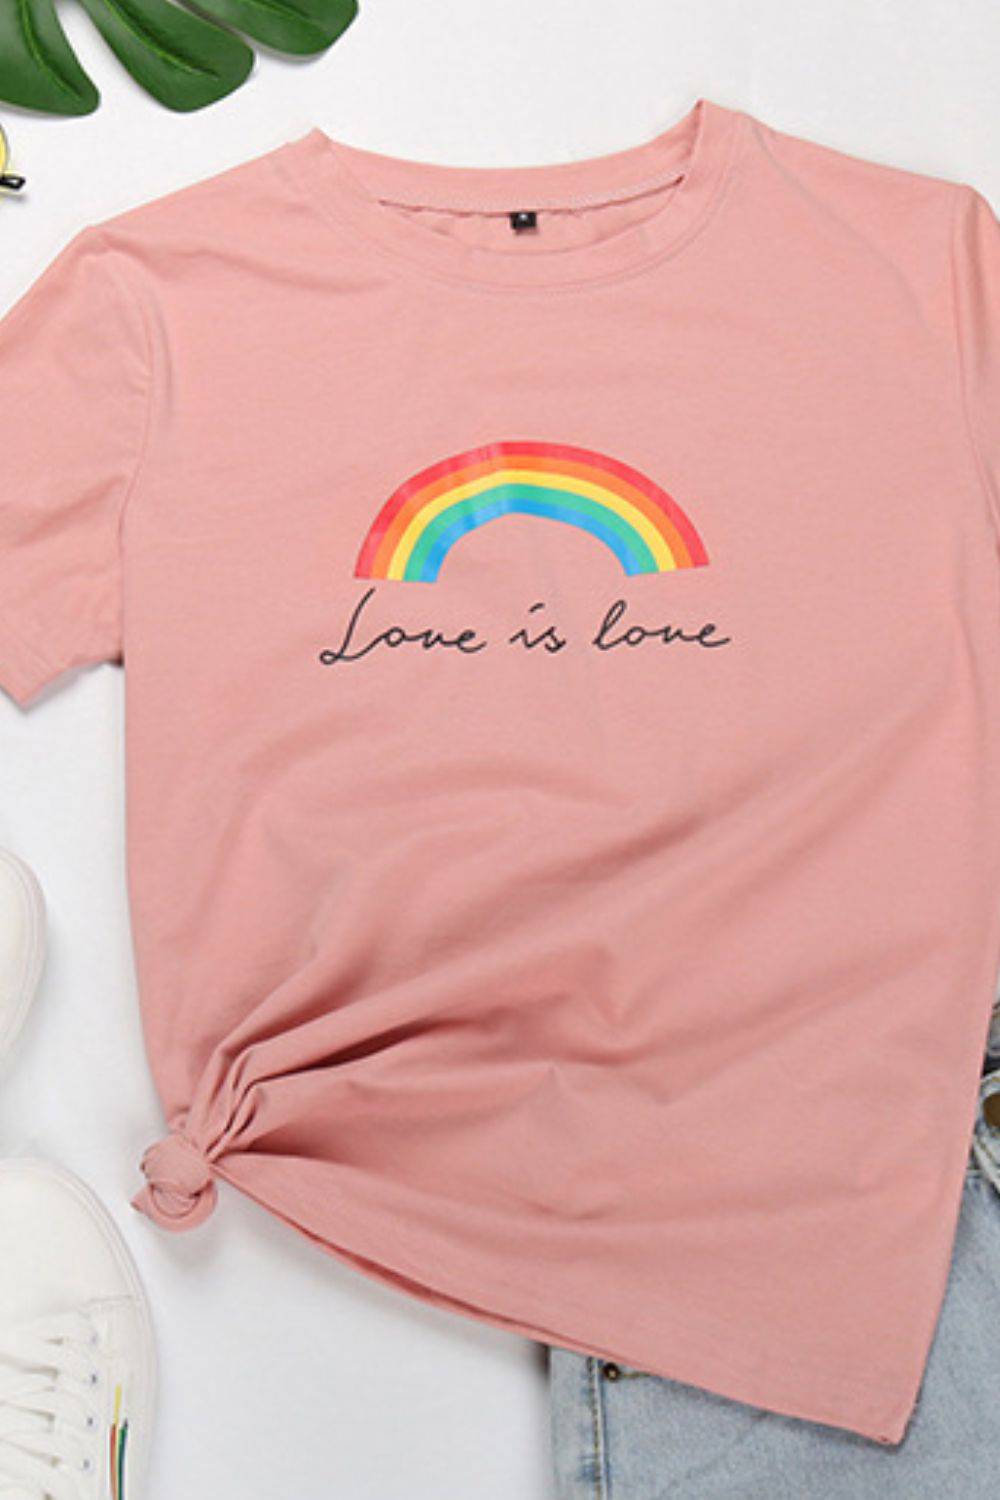 Love is Love - Wear Your Heart on Your Sleeve and Spread Positivity Everywhere You Go! - Guy Christopher